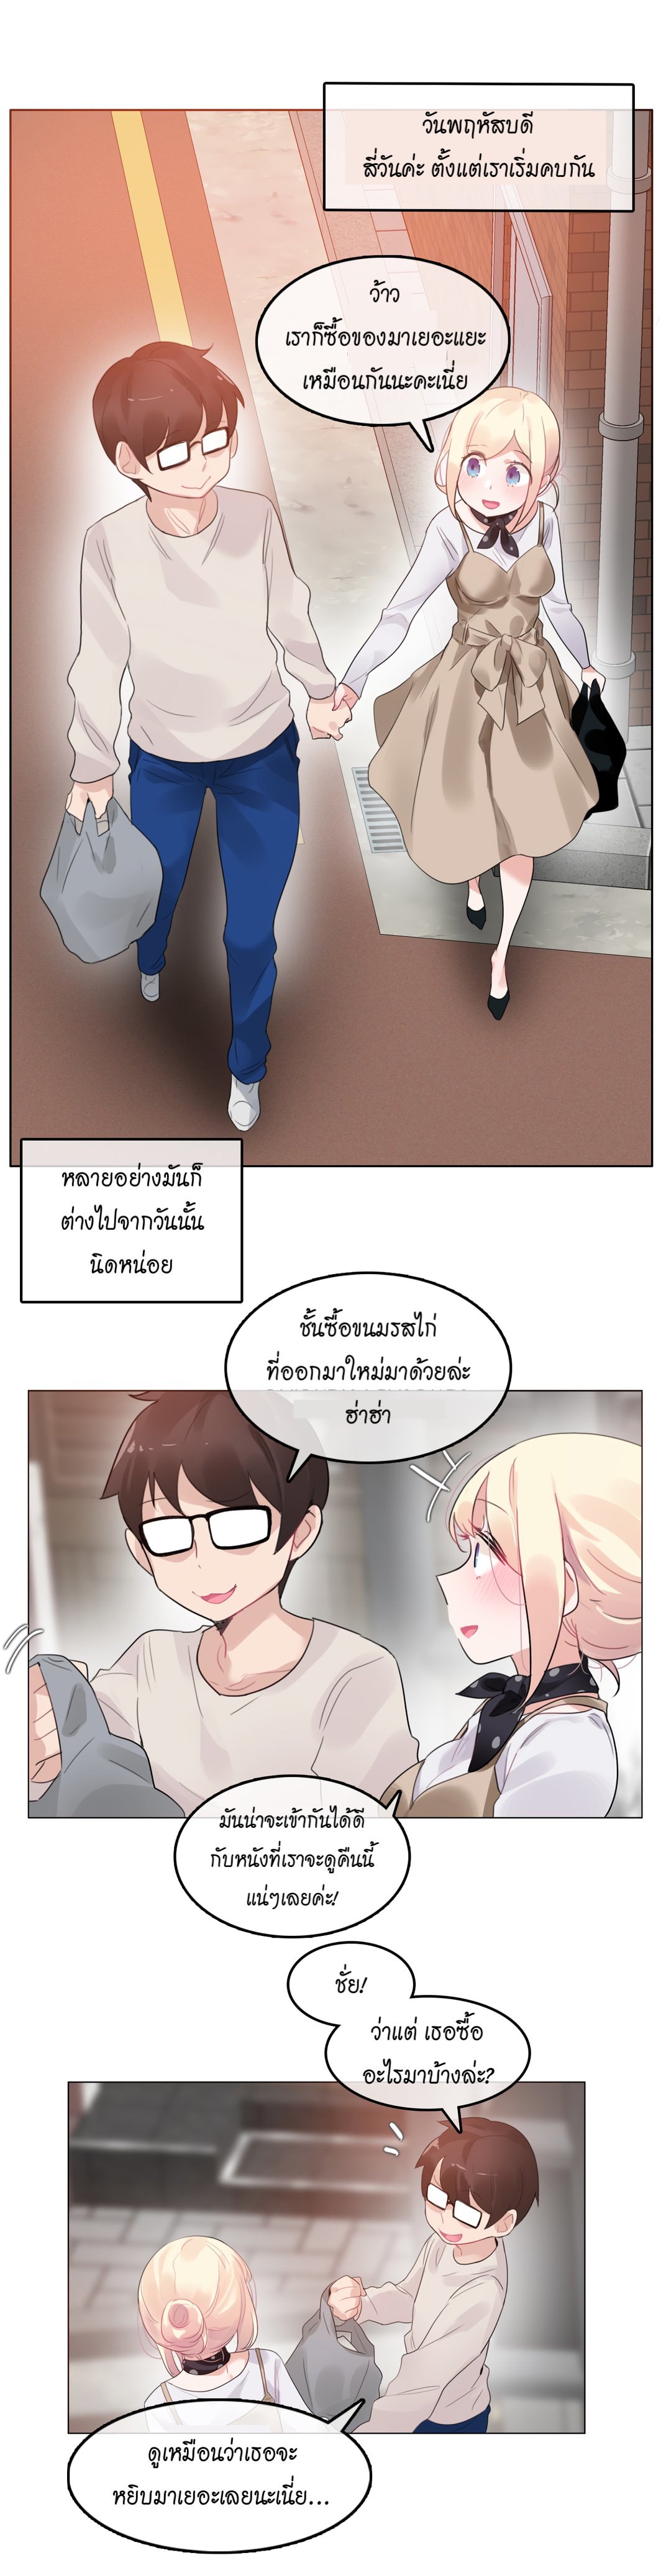 A Pervert’s Daily Life 56 12